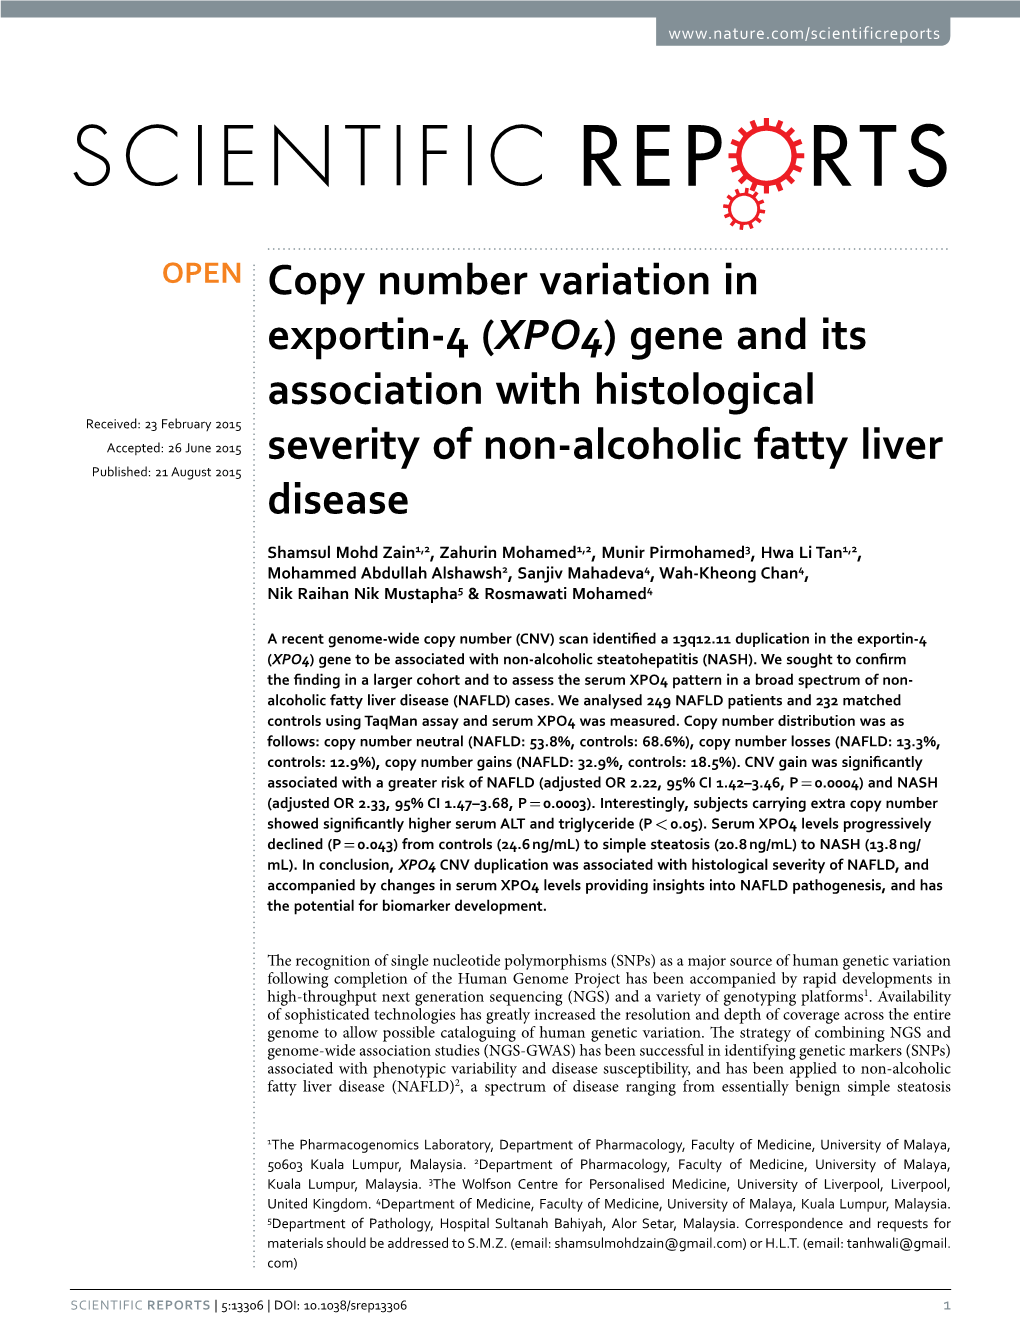 (XPO4) Gene and Its Association with Histological Severity of Non-Alcoholic Fatty Liver Disease